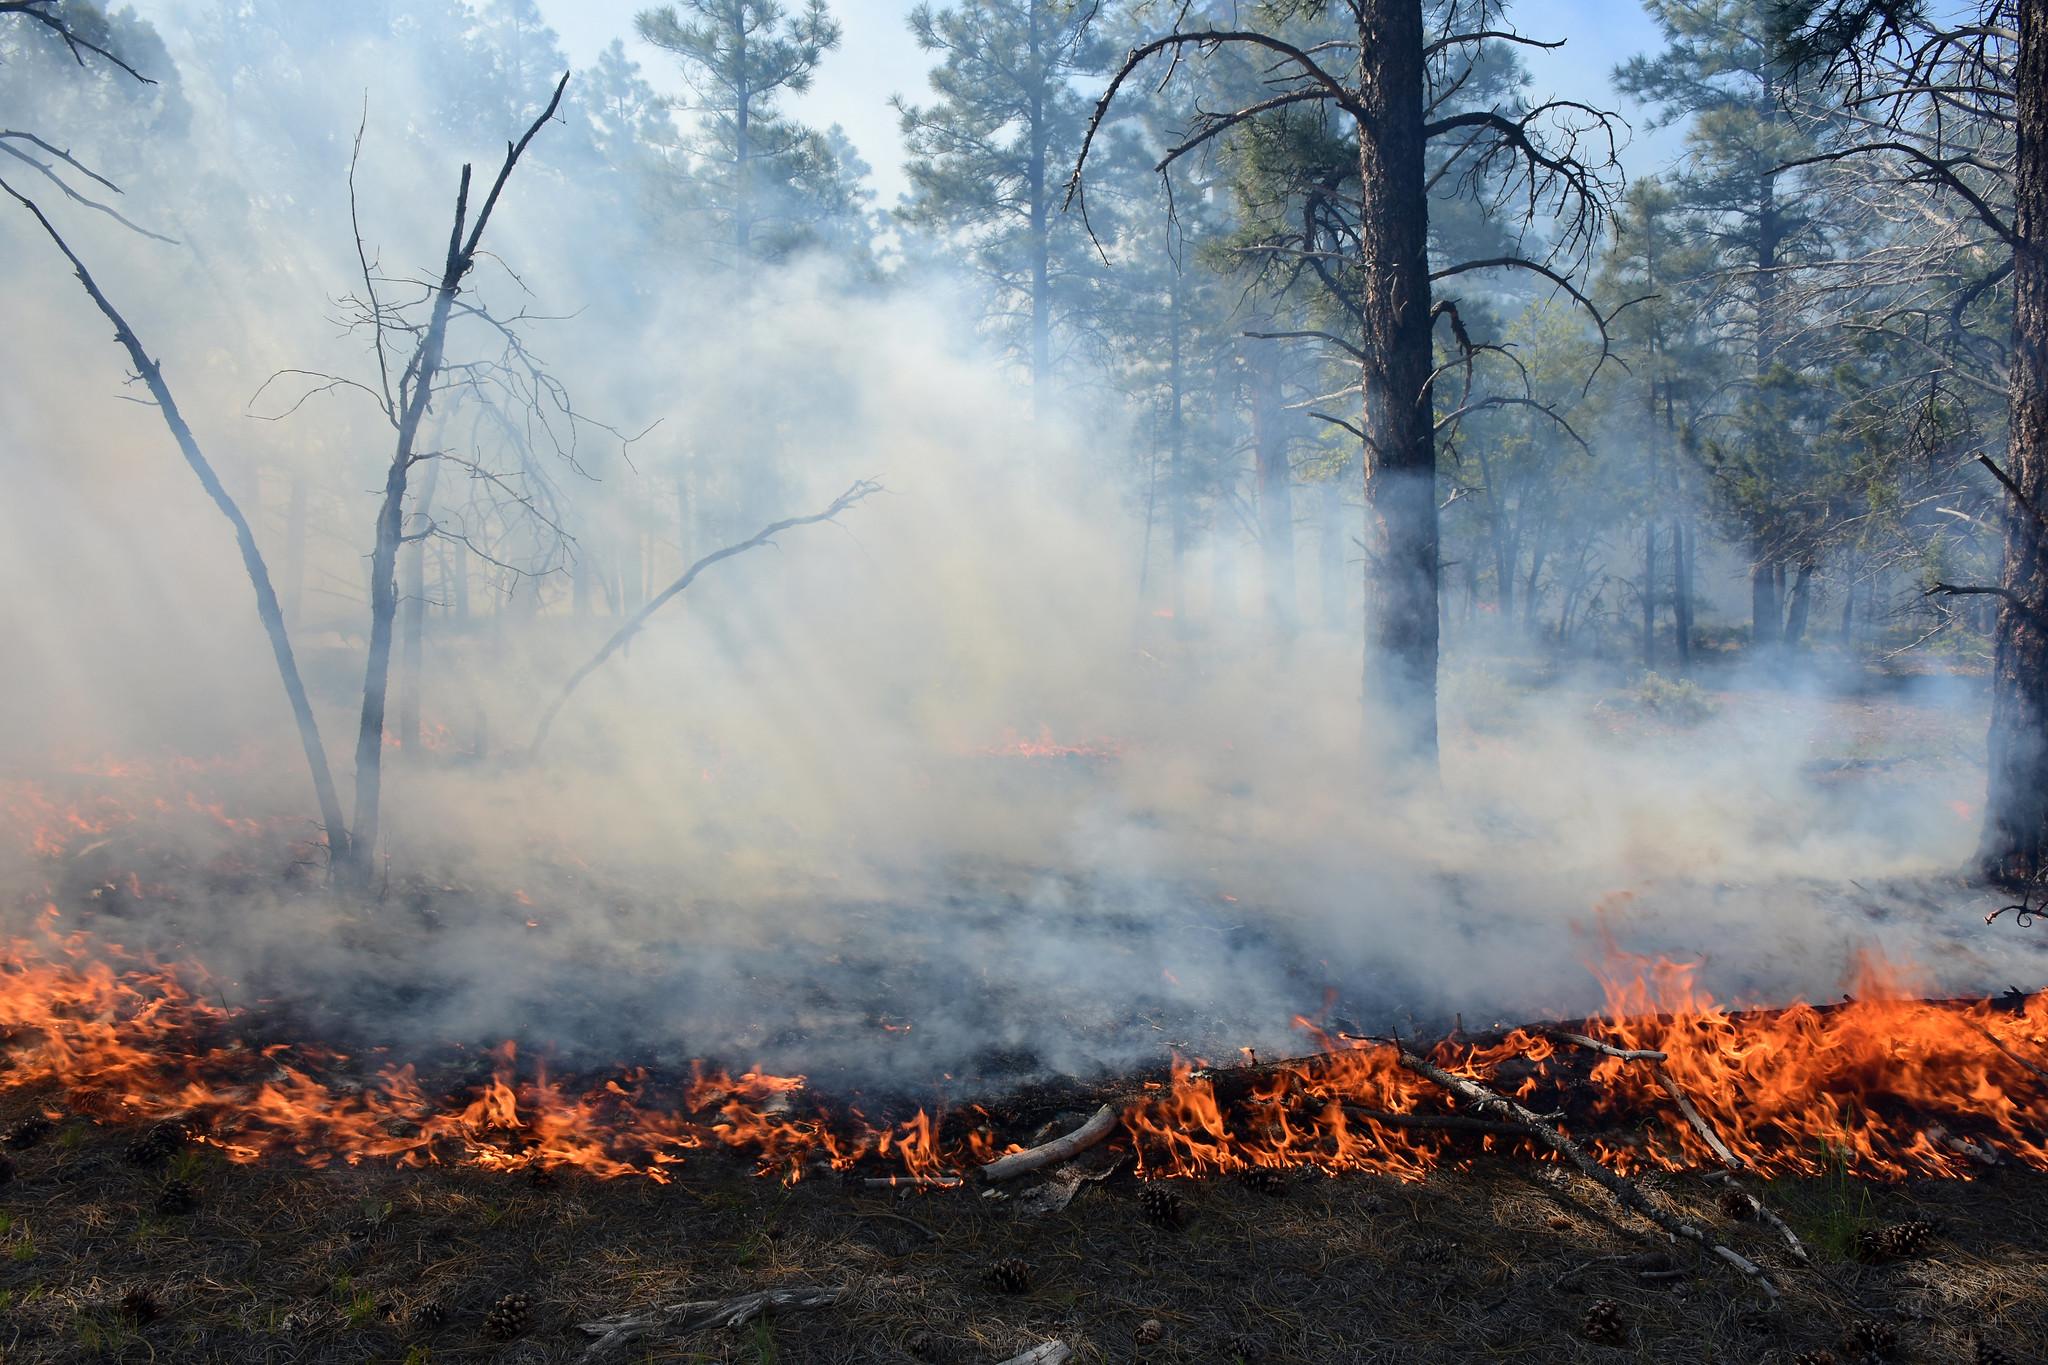 flames creeping across the forest floor amidst green ponderosa pine trees